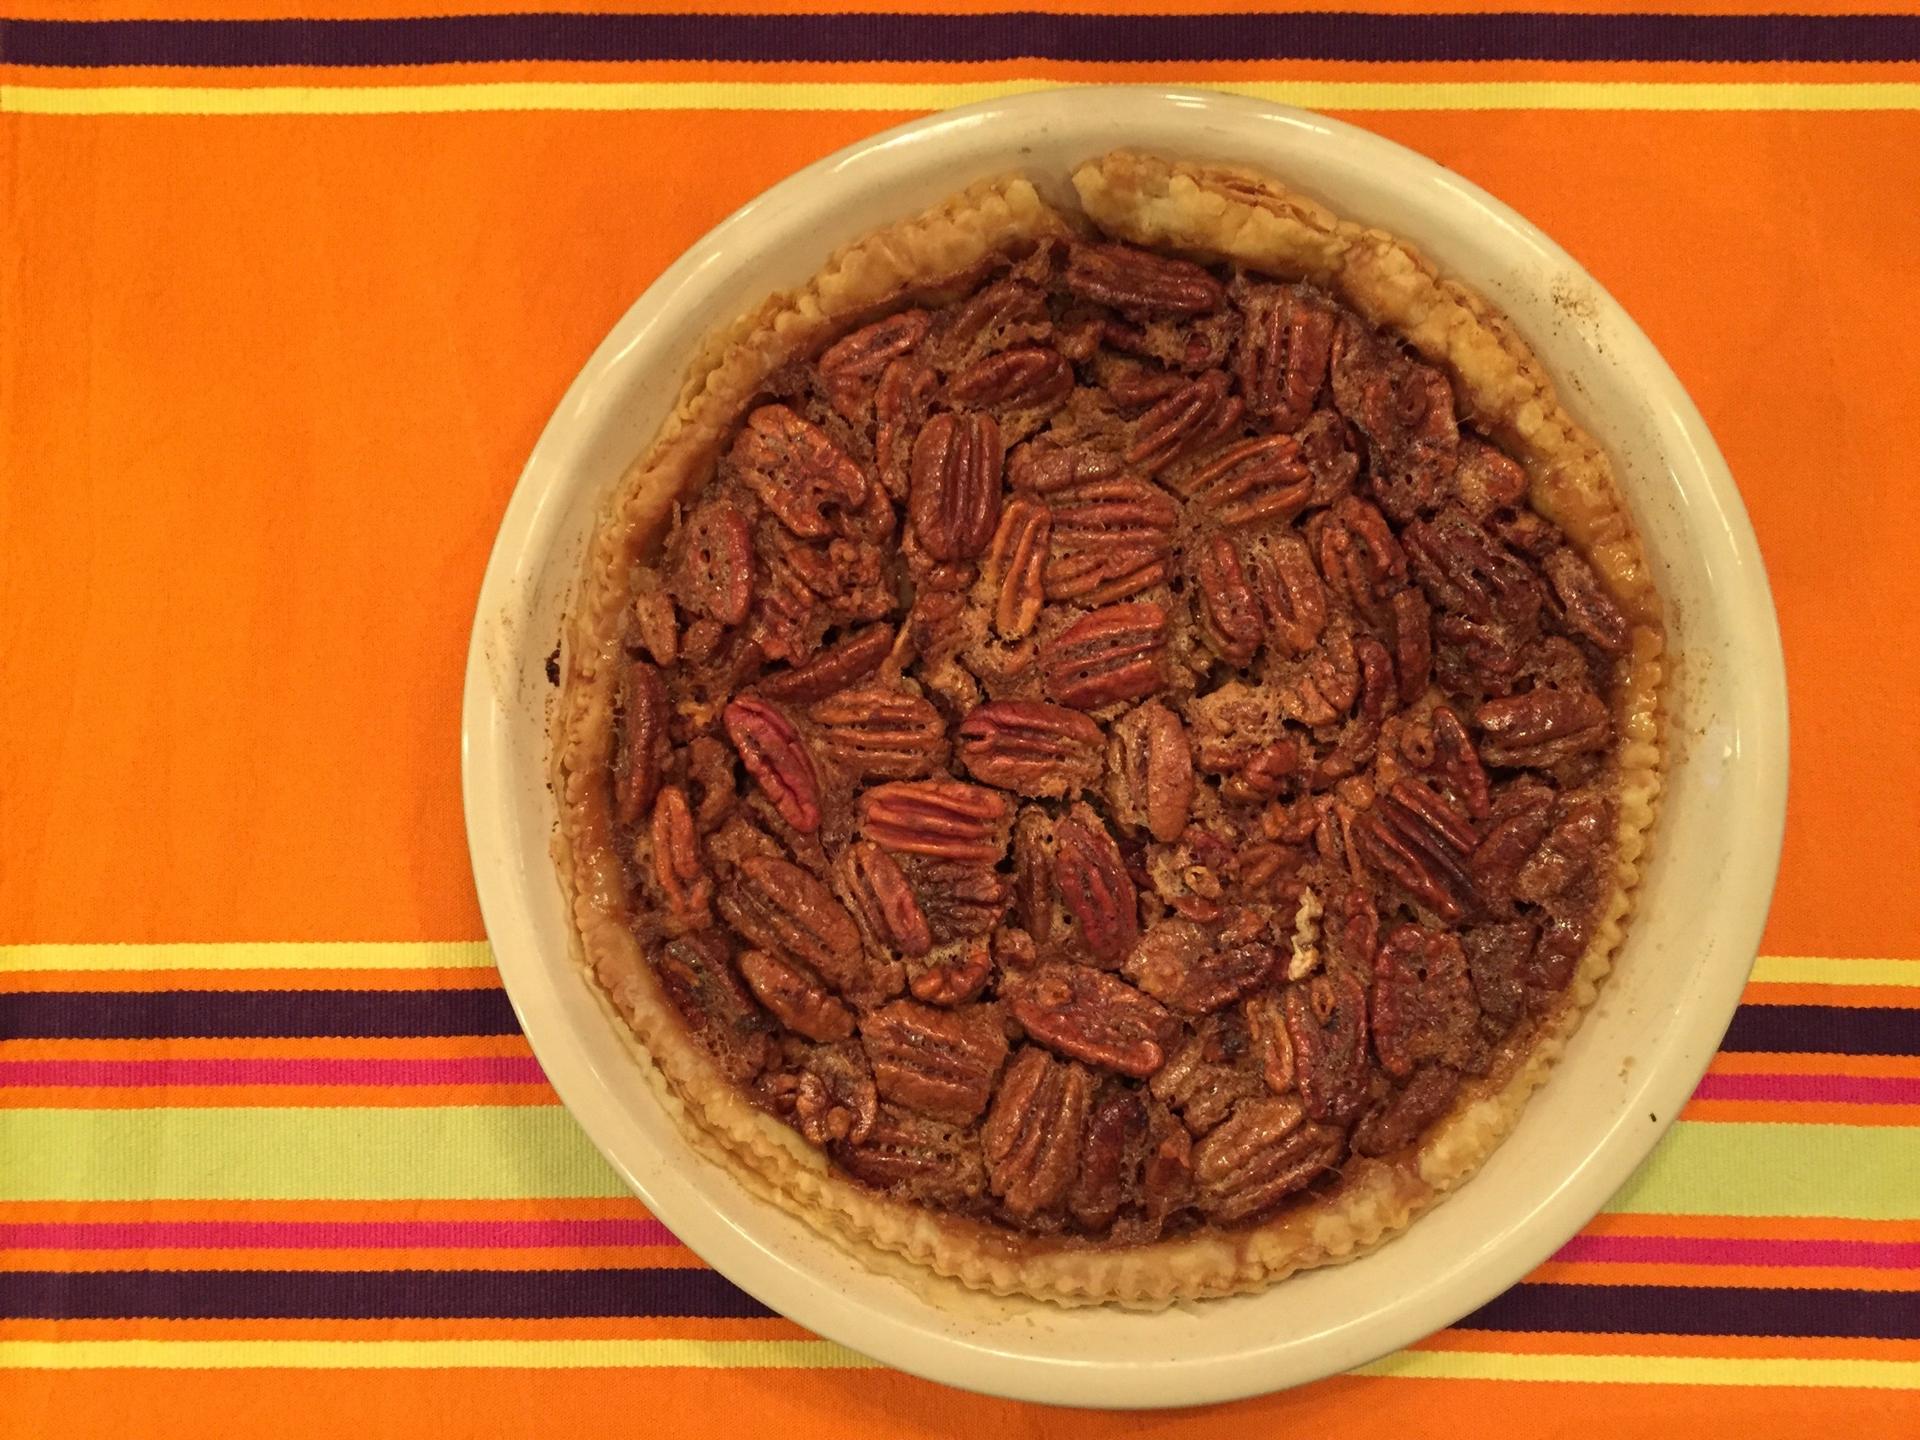 Steven made this pecan pie for Thanksgiving.